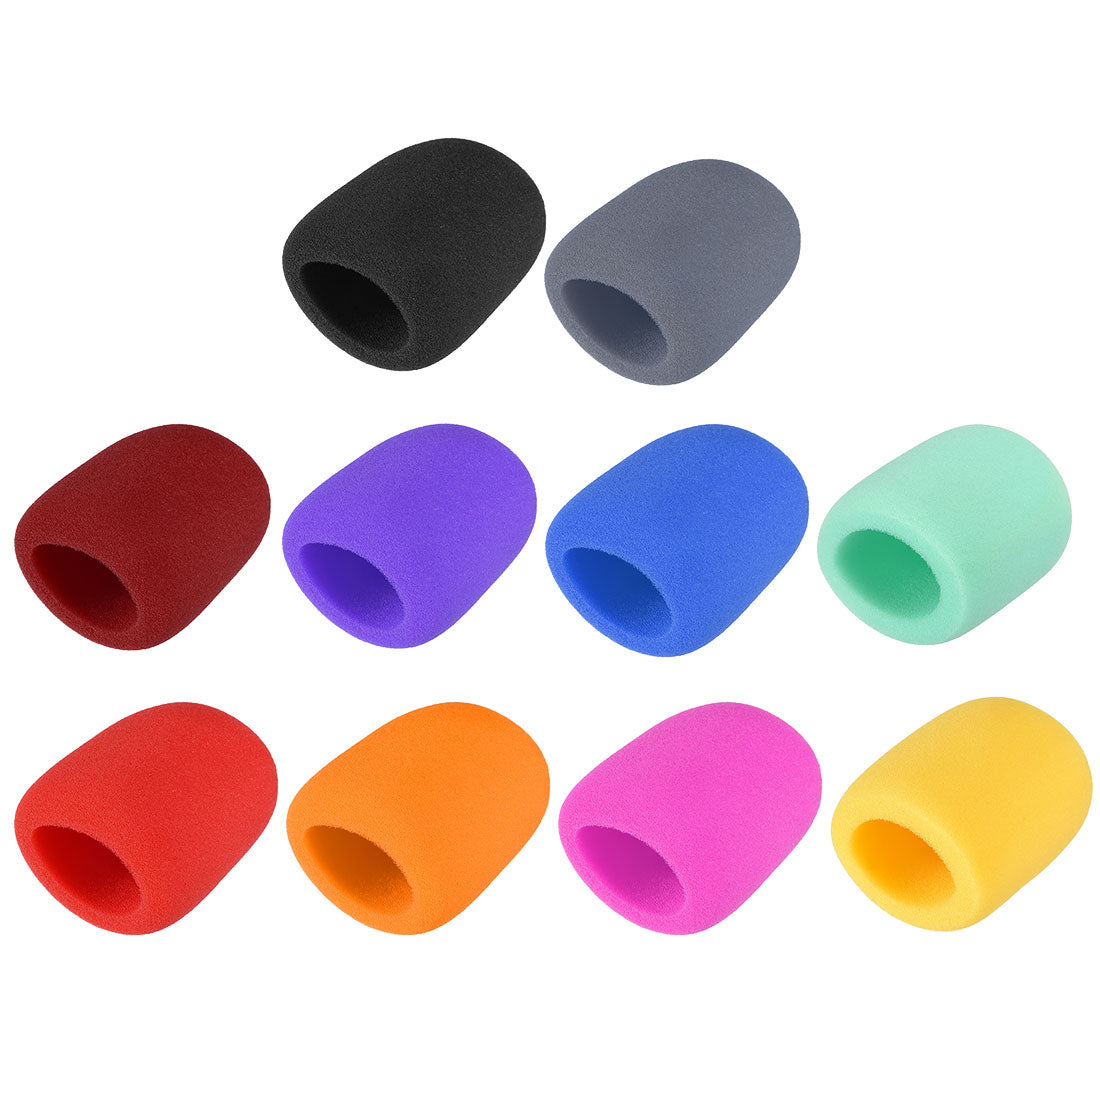 uxcell Uxcell 10 Pack Thicken Sponge Foam Mic Cover Handheld Microphone Windscreen Pack for KTV